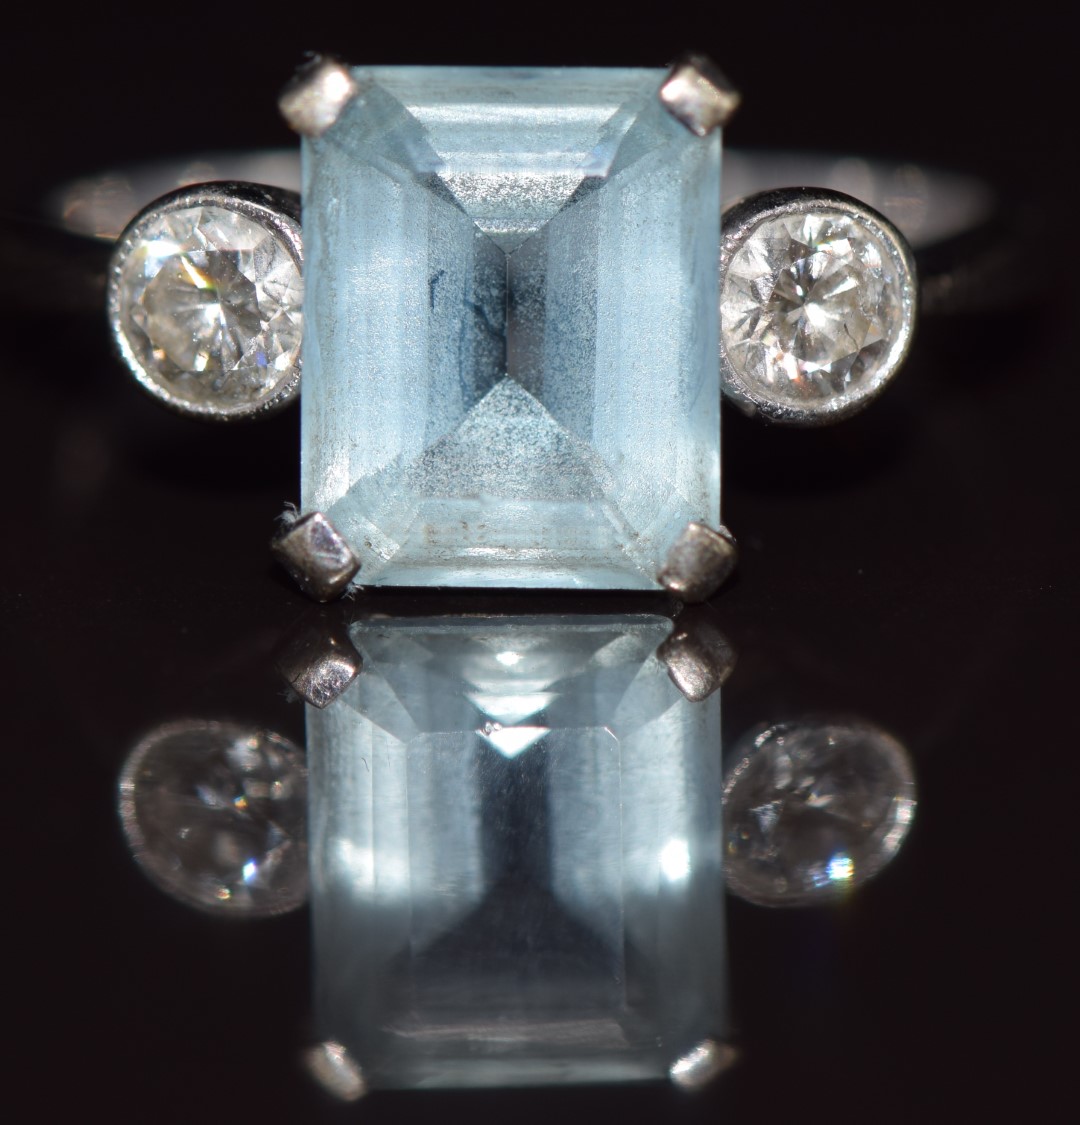 An 18ct white gold ring set with an emerald cut aquamarine of approximately 2.6ct and two